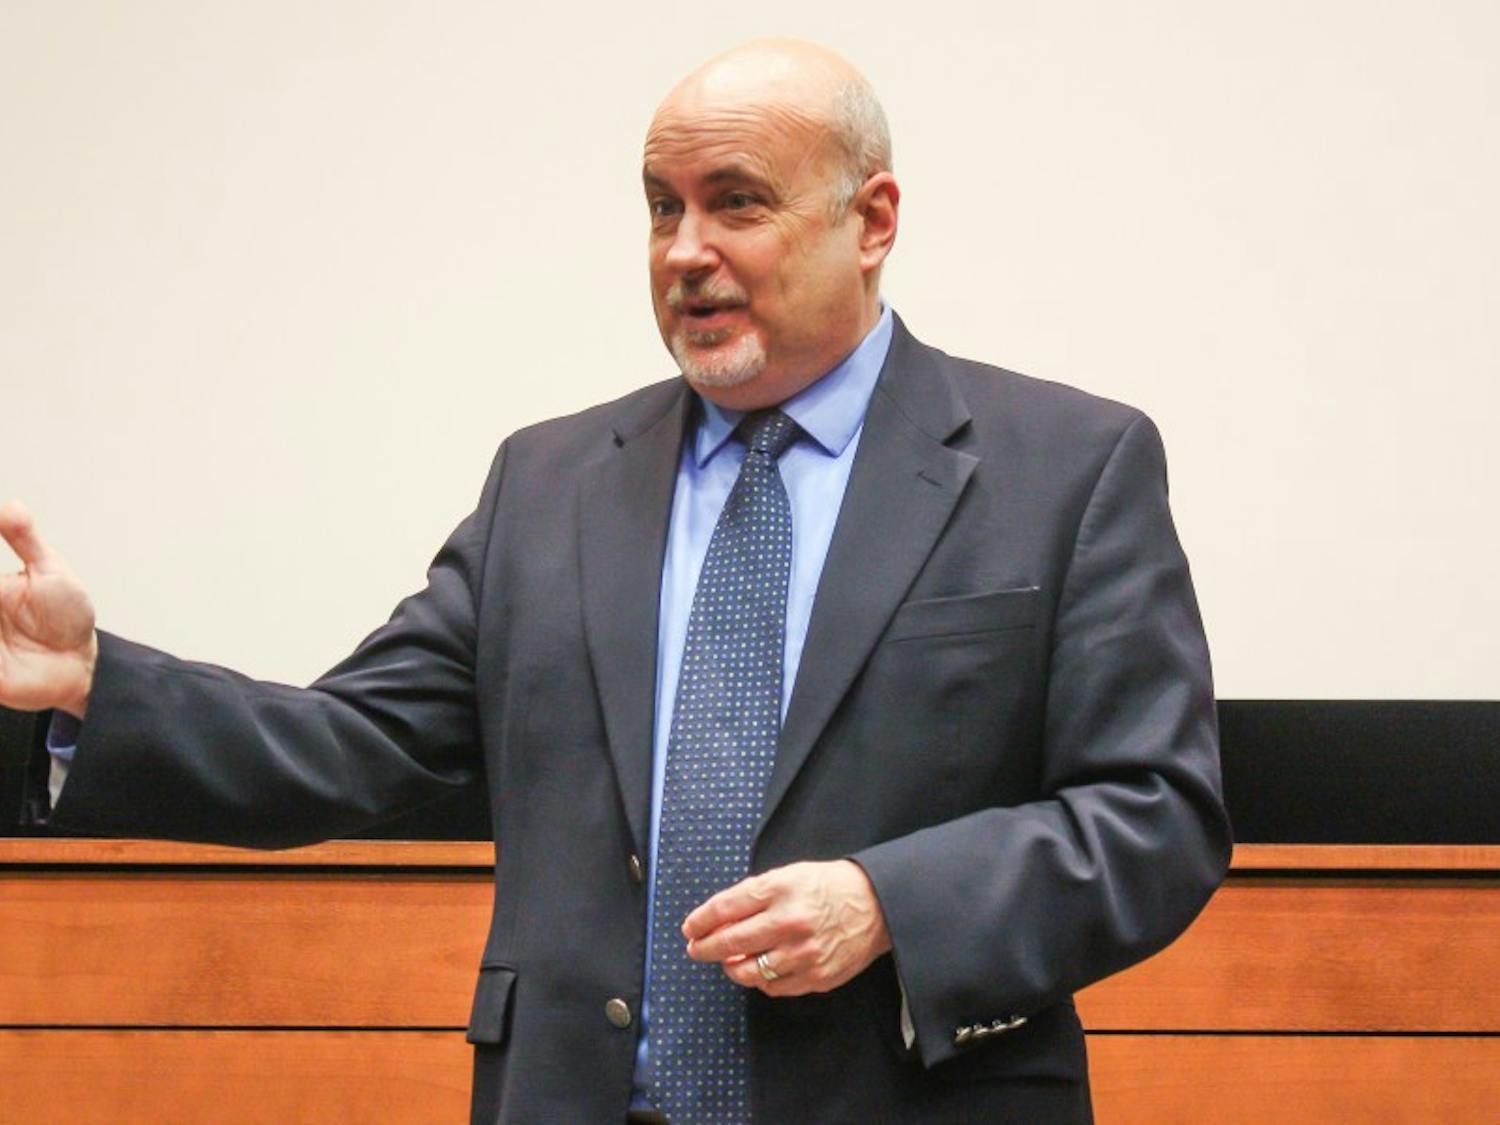 U.S. Rep. Mark Pocan, D-Wis., will hold a town hall on UW-Madison’s campus Thursday.